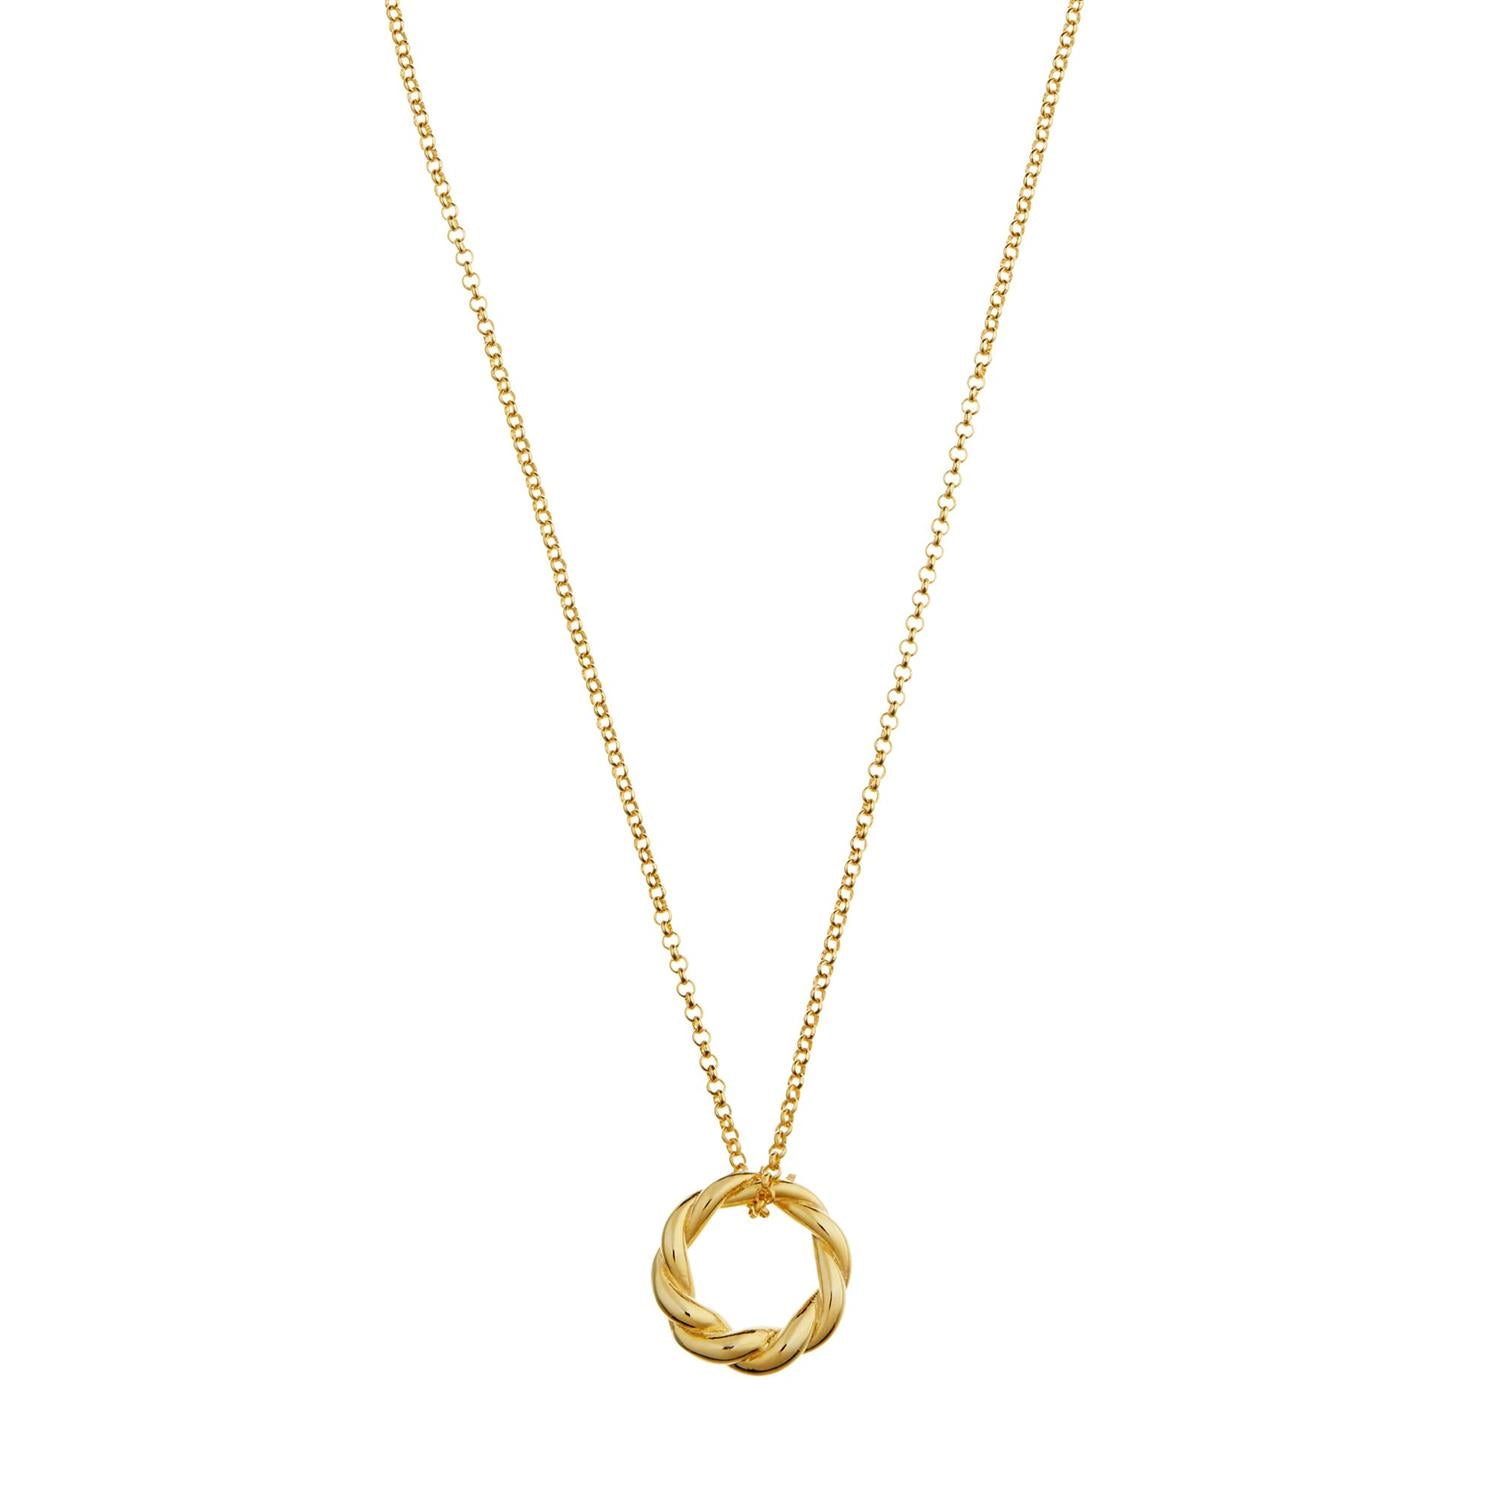 Ore28503 Rope Twist Open Circle Thread Through Necklace